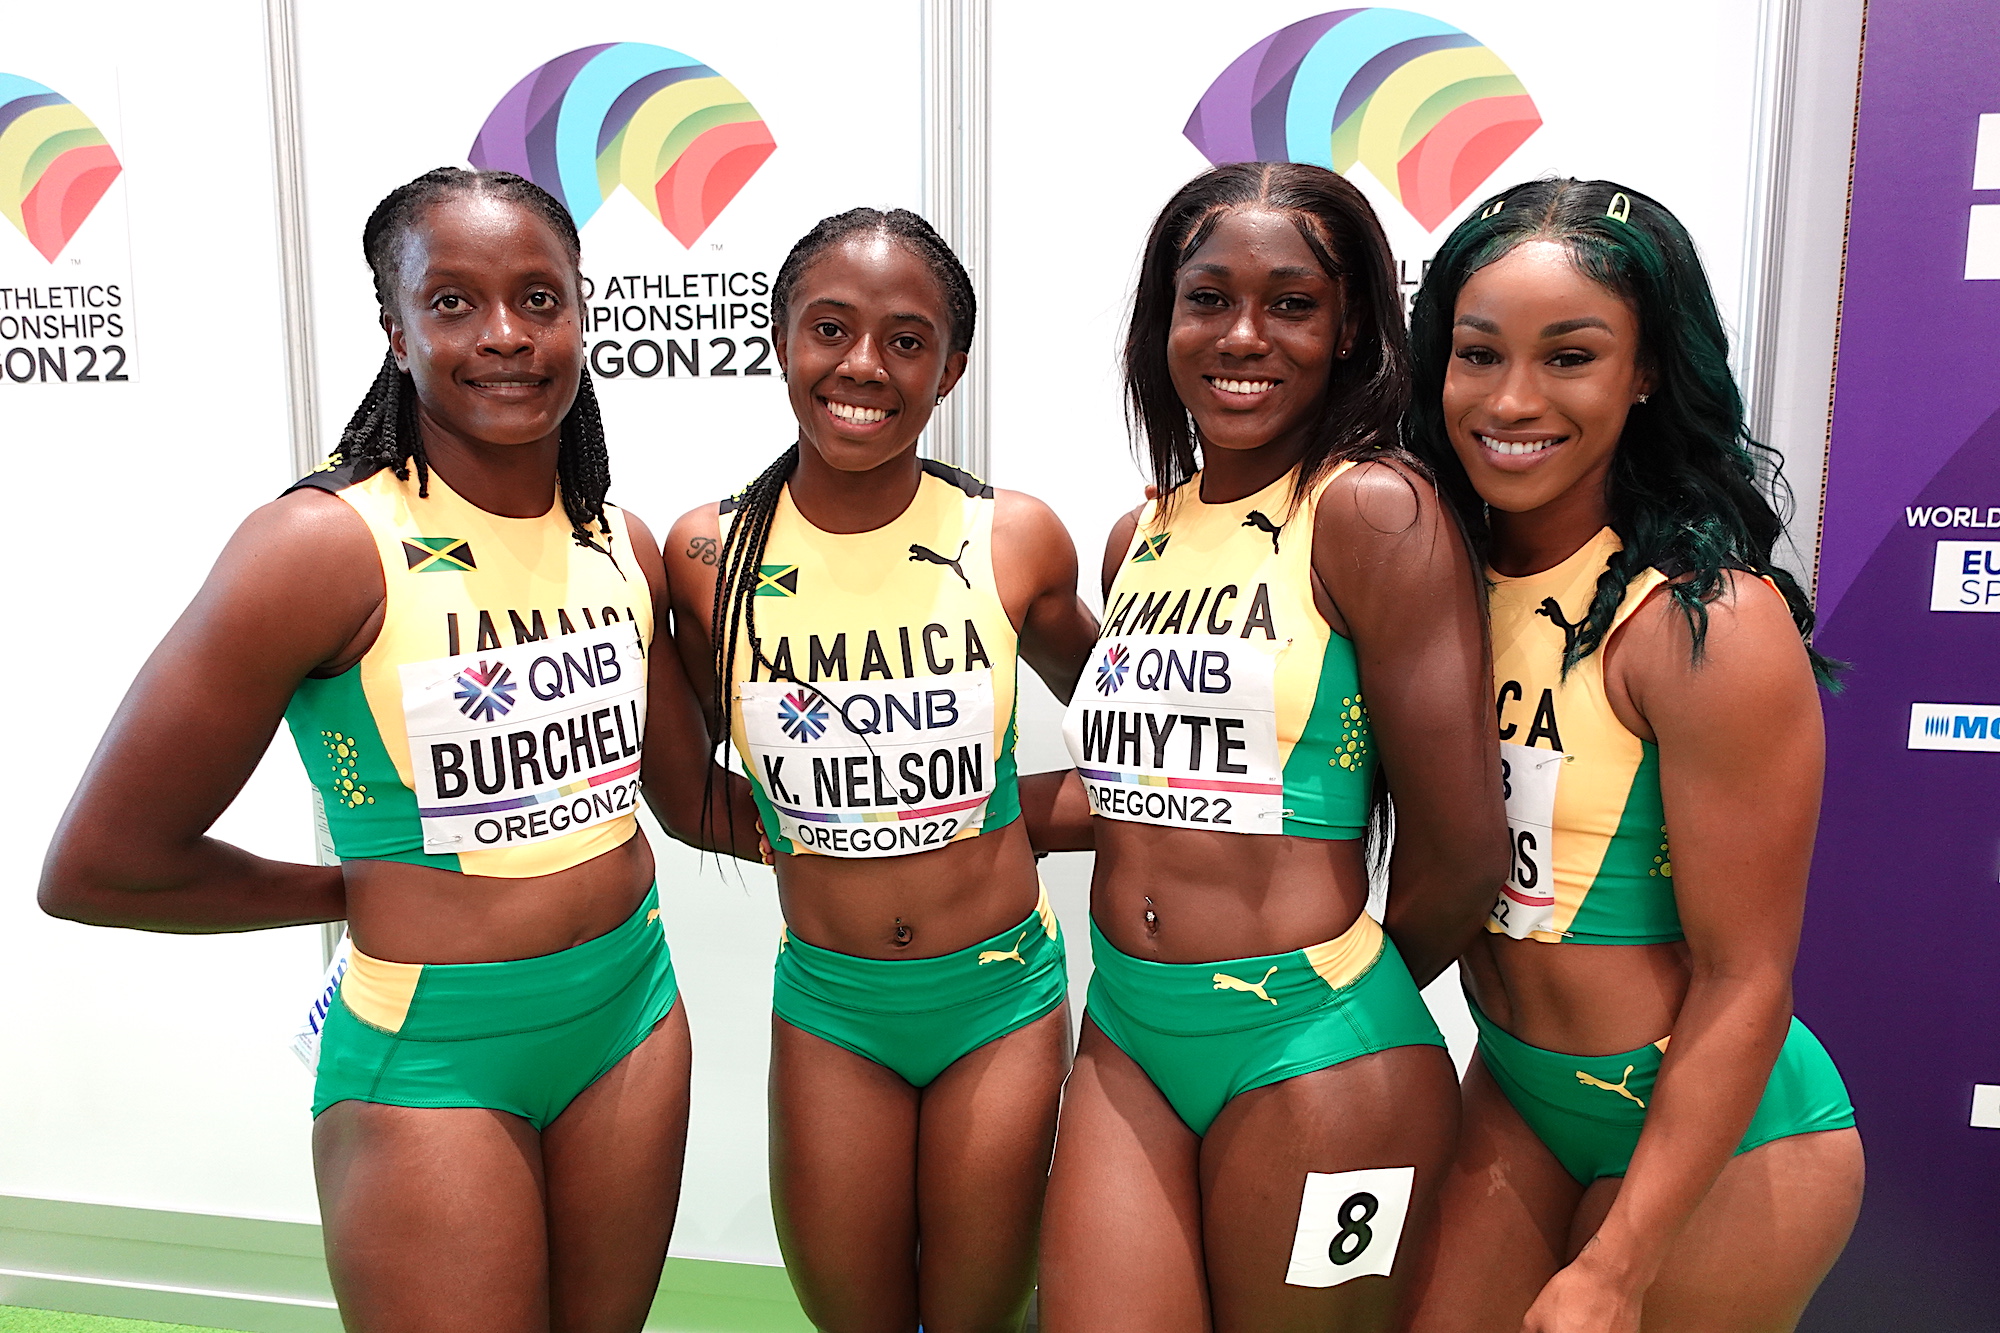 Briana Williams, Natalliah Whyte, Remona Burchell and Kemba Nelson made up the Jamaican team for the heats Oregon22